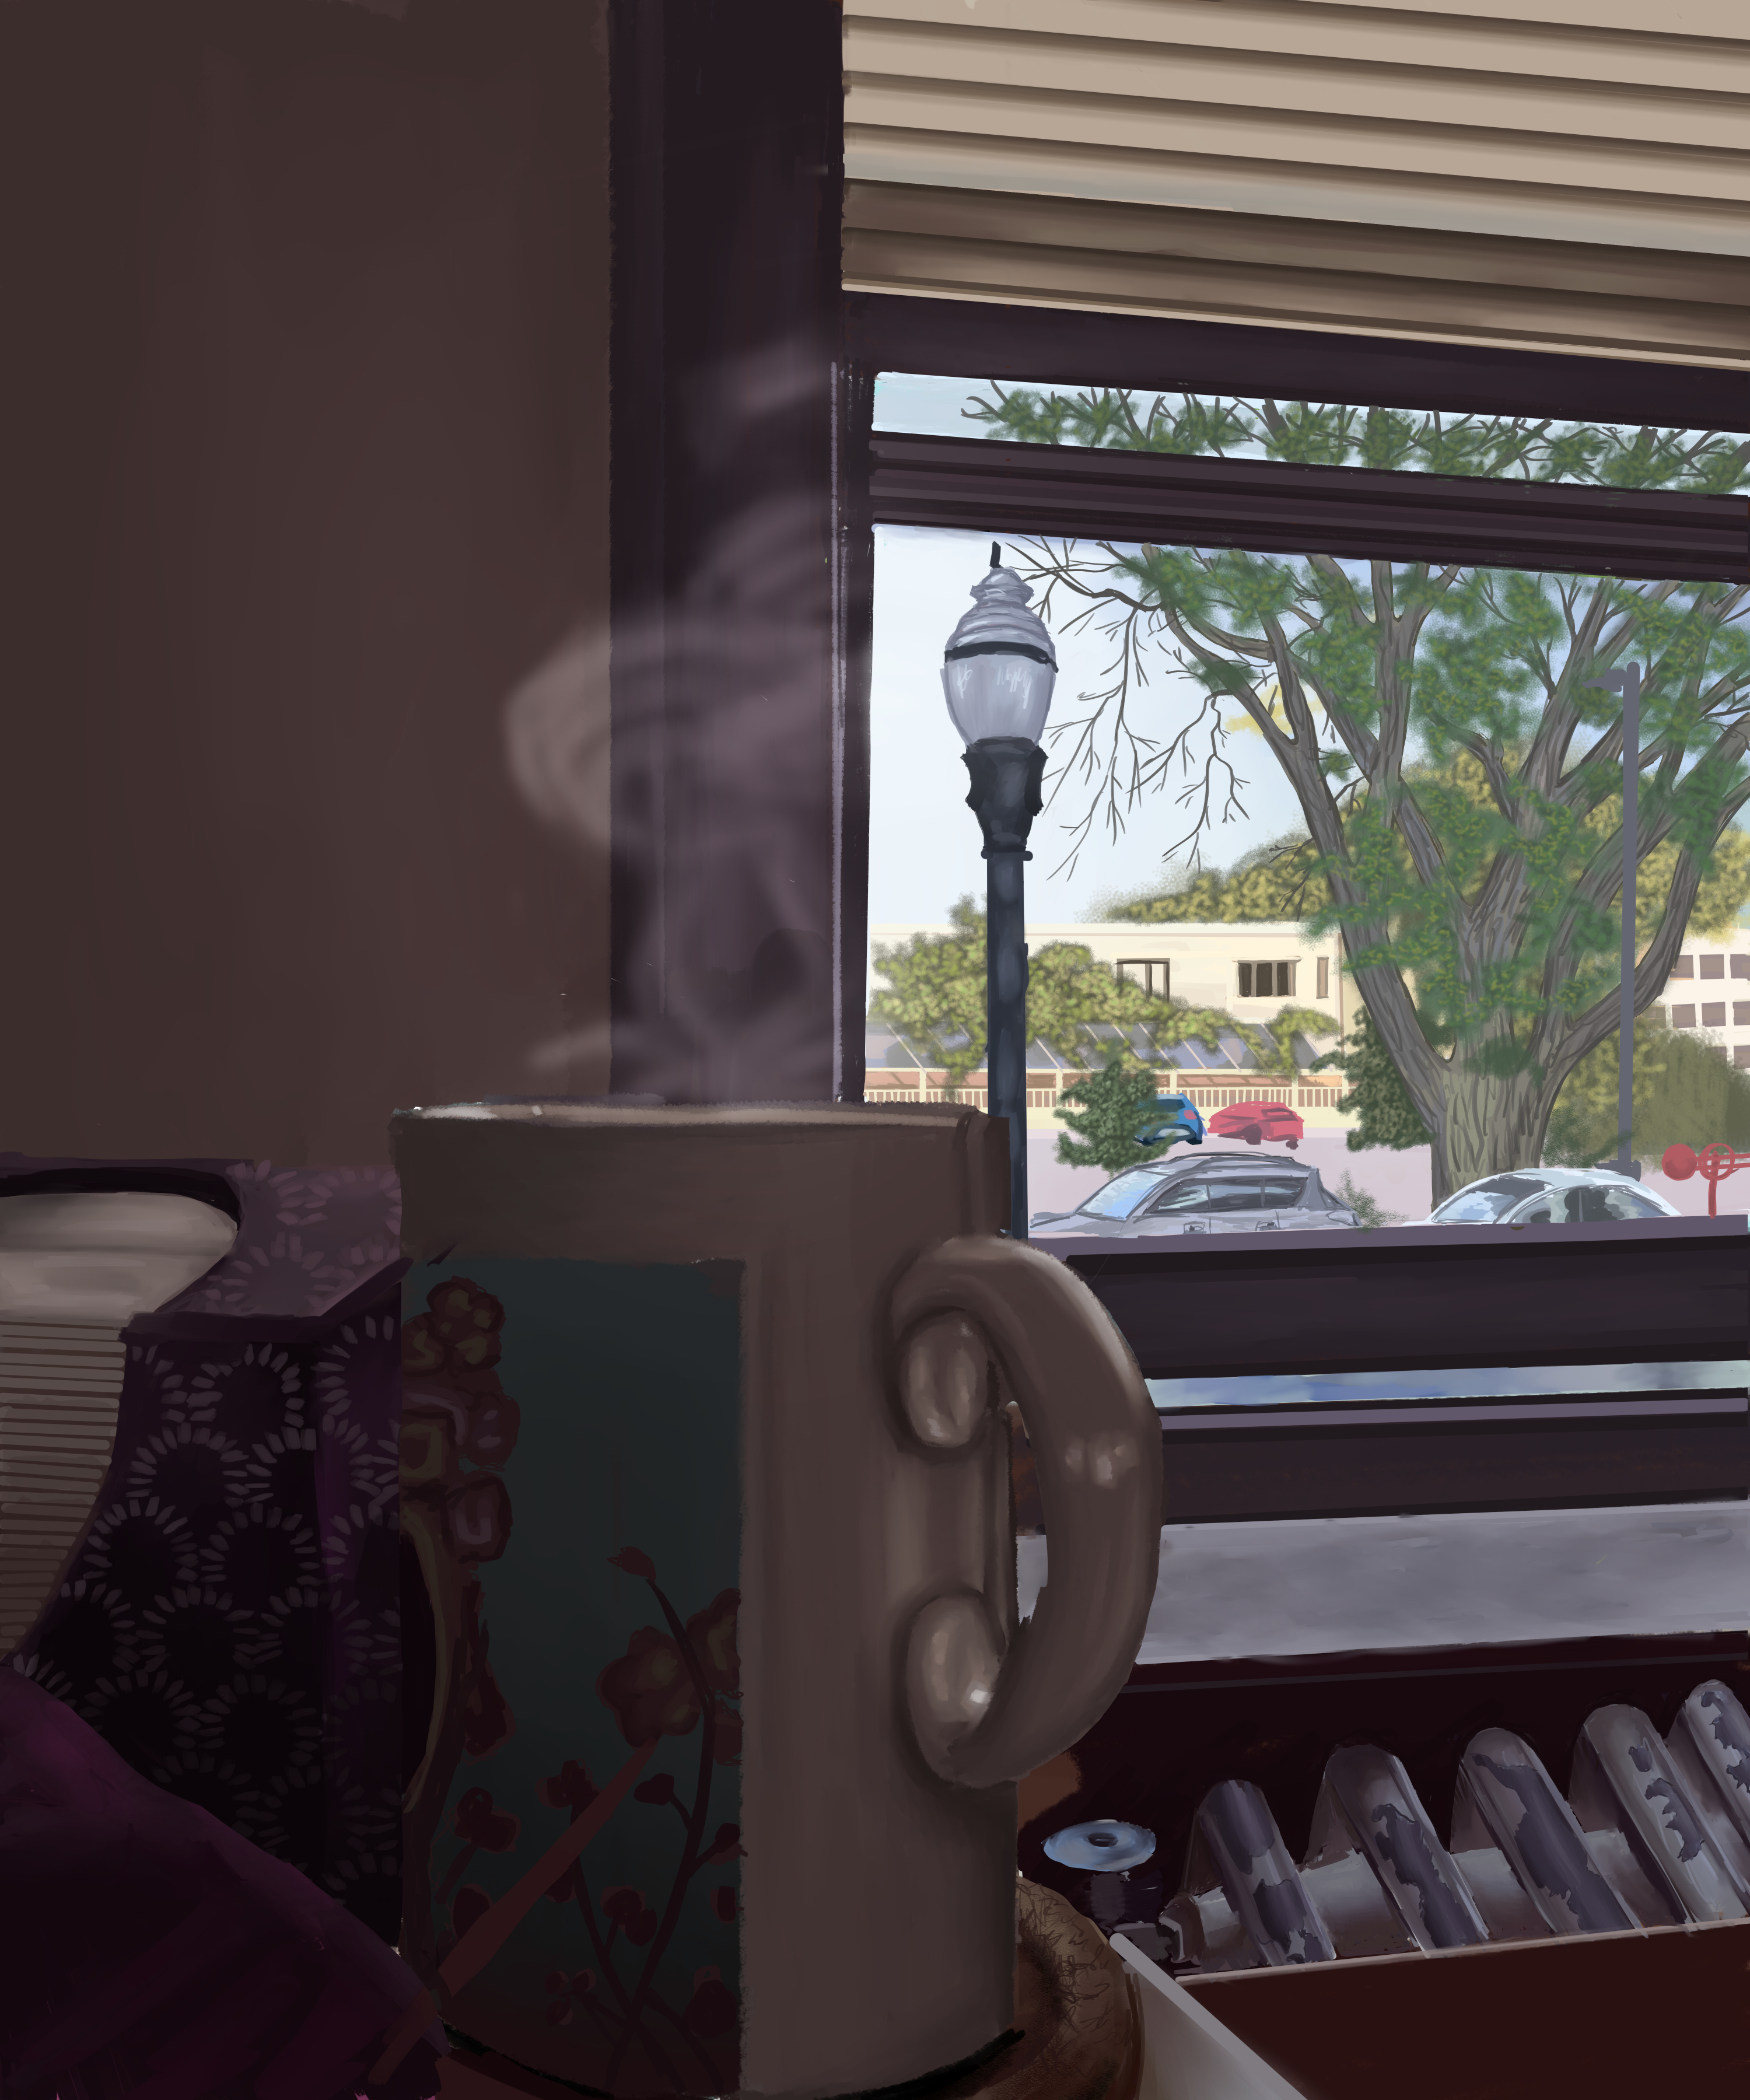 digital painting of out of focus mug with steam rising from it in foreground with in focus background of window looking at tree and cars on street outside